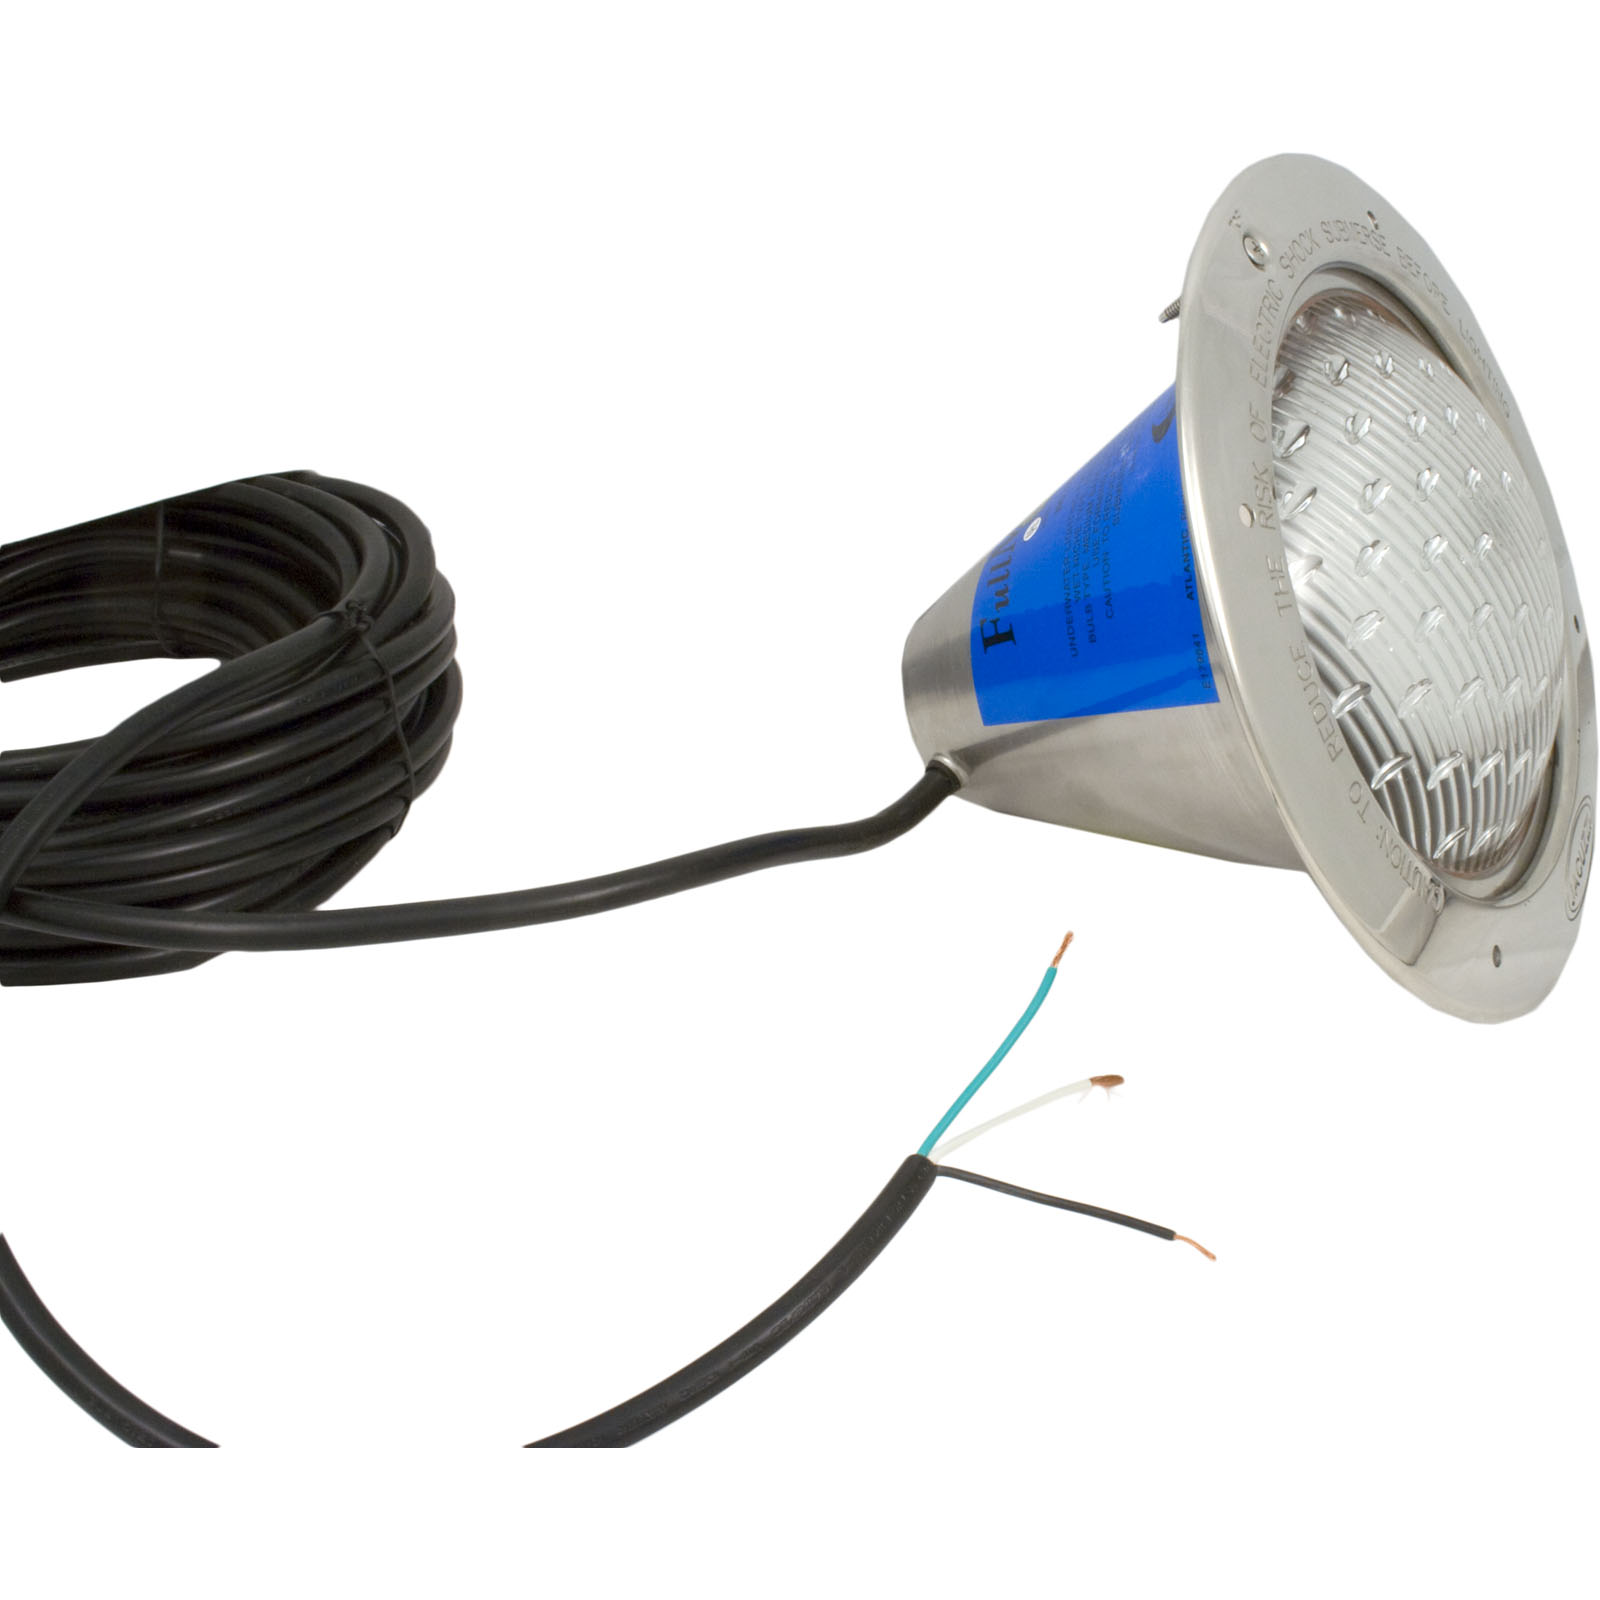 Picture of 941330120050 Pool Light Jacuzzi FullMoon 115v 300w  w/50ft cord